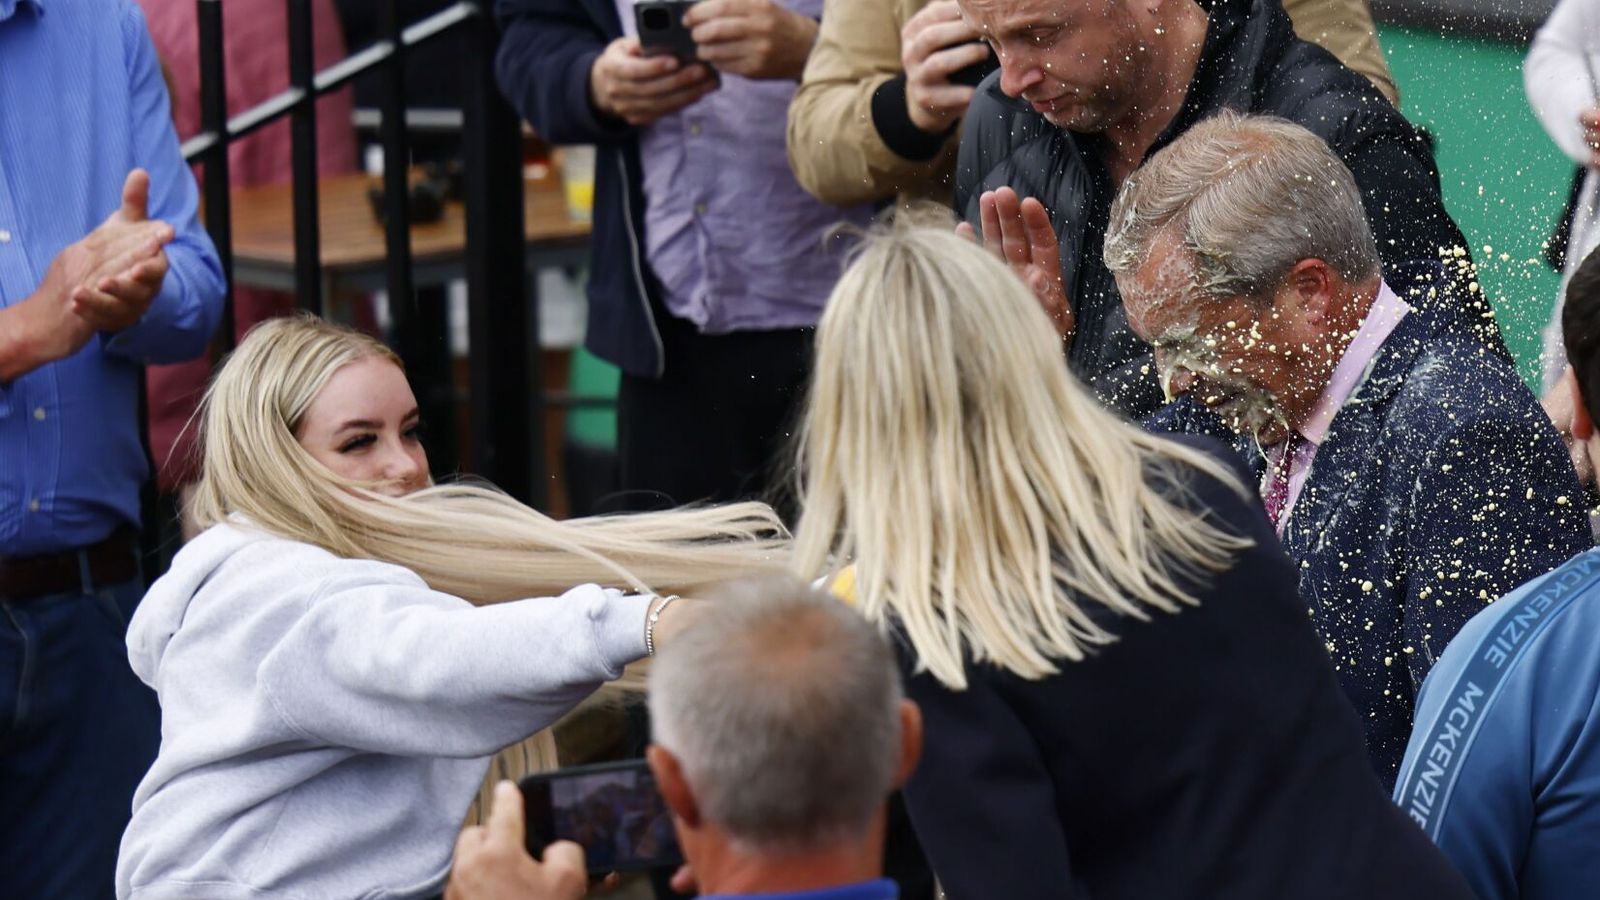 Nigel Farage has milkshake thrown over him after election campaign launch in Clacton